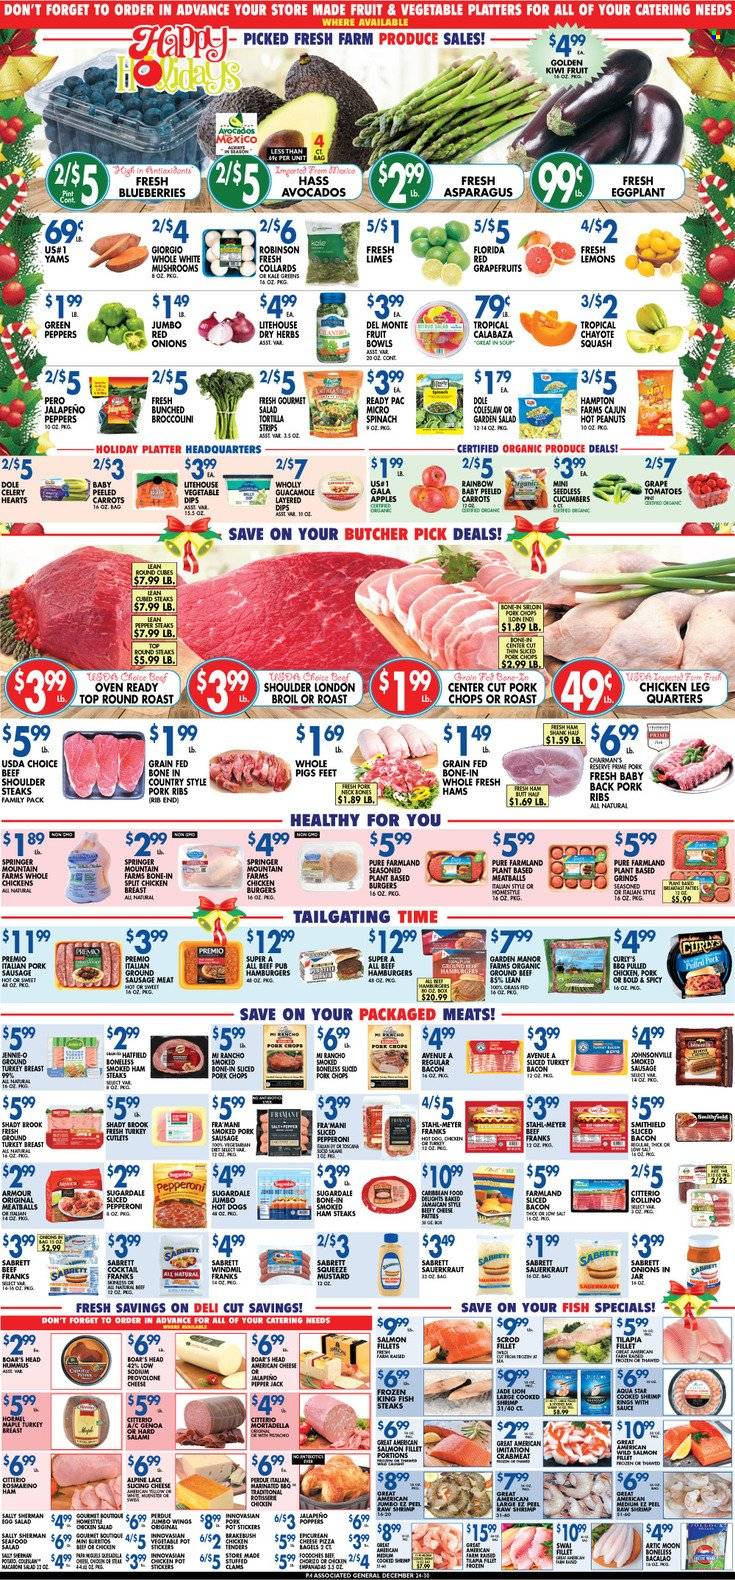 thumbnail - Associated Supermarkets Flyer - 12/24/2021 - 12/30/2021 - Sales products - tortillas, asparagus, carrots, celery, cucumber, red onions, kale, Dole, jalapeño, eggplant, sleeved celery, chayote squash, apples, Gala, grapefruits, kiwi, limes, chayote, clams, crab meat, salmon, salmon fillet, tilapia, fish, king fish, shrimps, fish steak, coleslaw, hot dog, pizza, meatballs, soup, hamburger, Perdue®, Ready Pac, pulled pork, pulled chicken, Hormel, Sugardale, bacon, mortadella, salami, ham, smoked ham, Johnsonville, sausage, smoked sausage, pork sausage, pepperoni, hummus, guacamole, ham steaks, american cheese, Provolone, salt, sauerkraut, pepper, mustard, peanuts, Ron Pelicano, ground turkey, turkey breast, whole chicken, chicken breasts, chicken legs, beef meat, steak, round roast, sausage meat, pork chops, pork meat, pork ribs, pork back ribs, deodorant, lemons. Page 4.